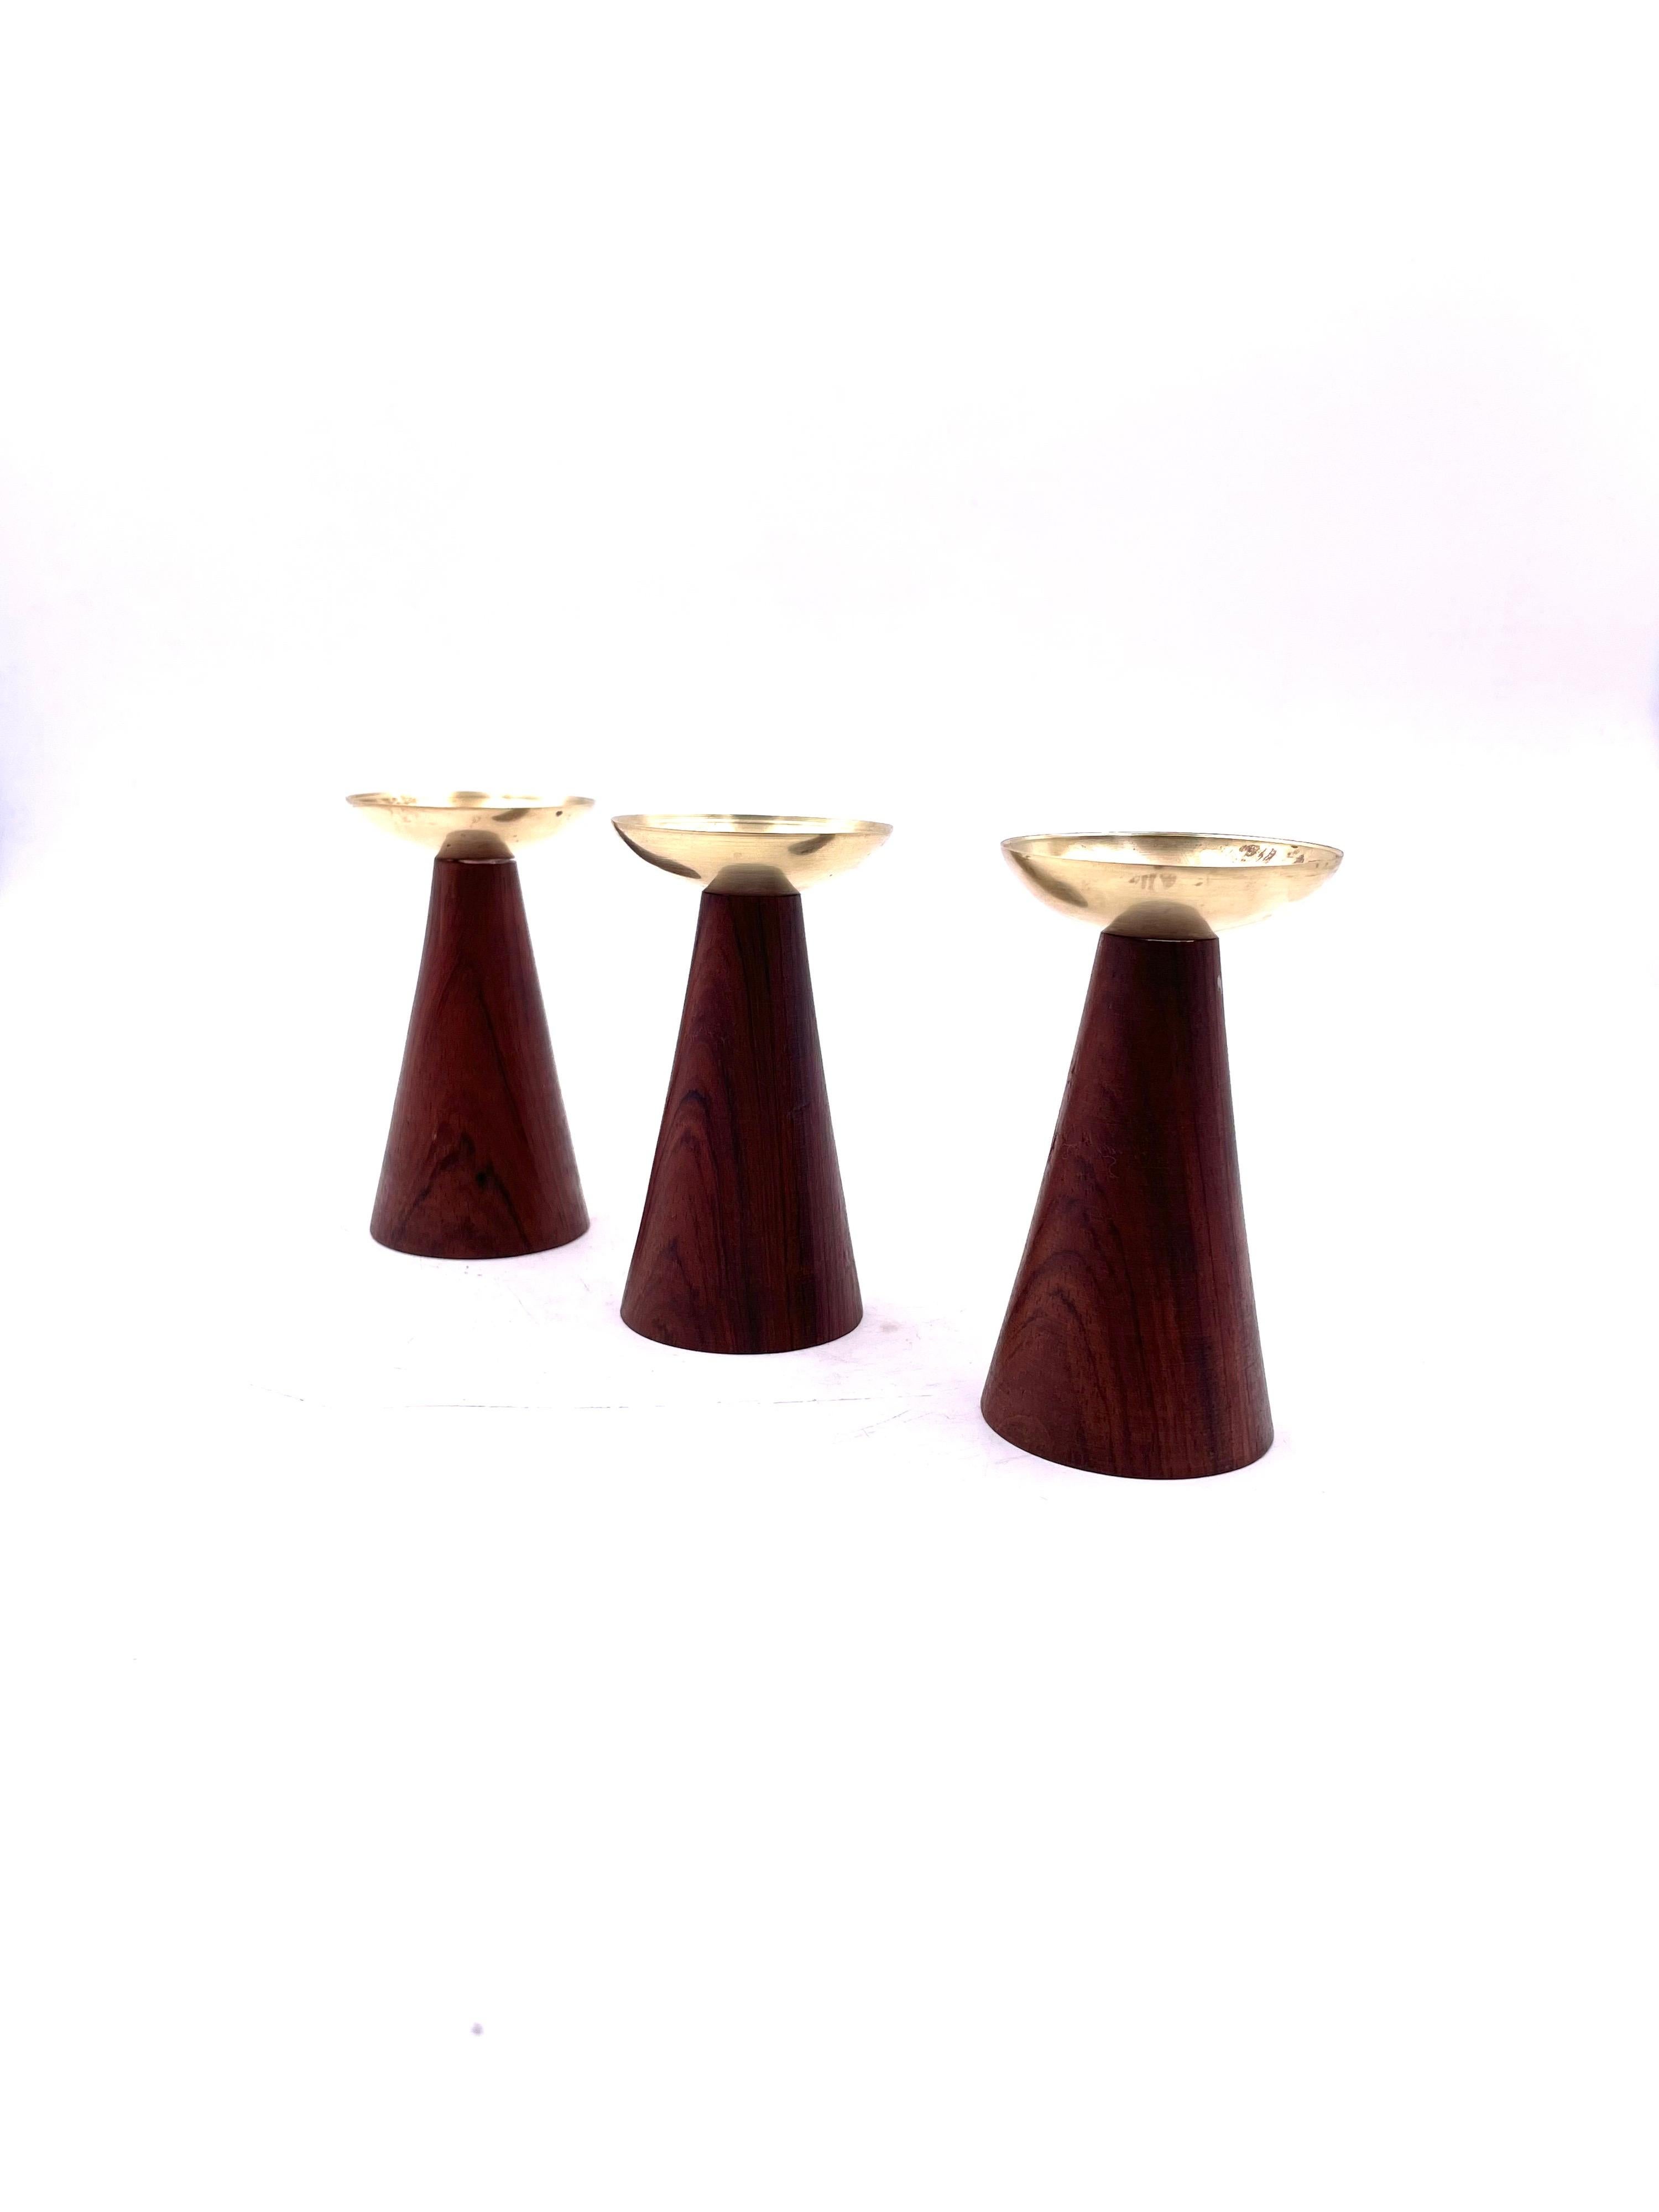 Beautiful and rare set of 3 candle holders designed by Hans Agne Jakobsson , made in Sweden circa 1950's solid teak turned base with solid patinated brass, and removable tops that secure with the candles, the set retains its label.